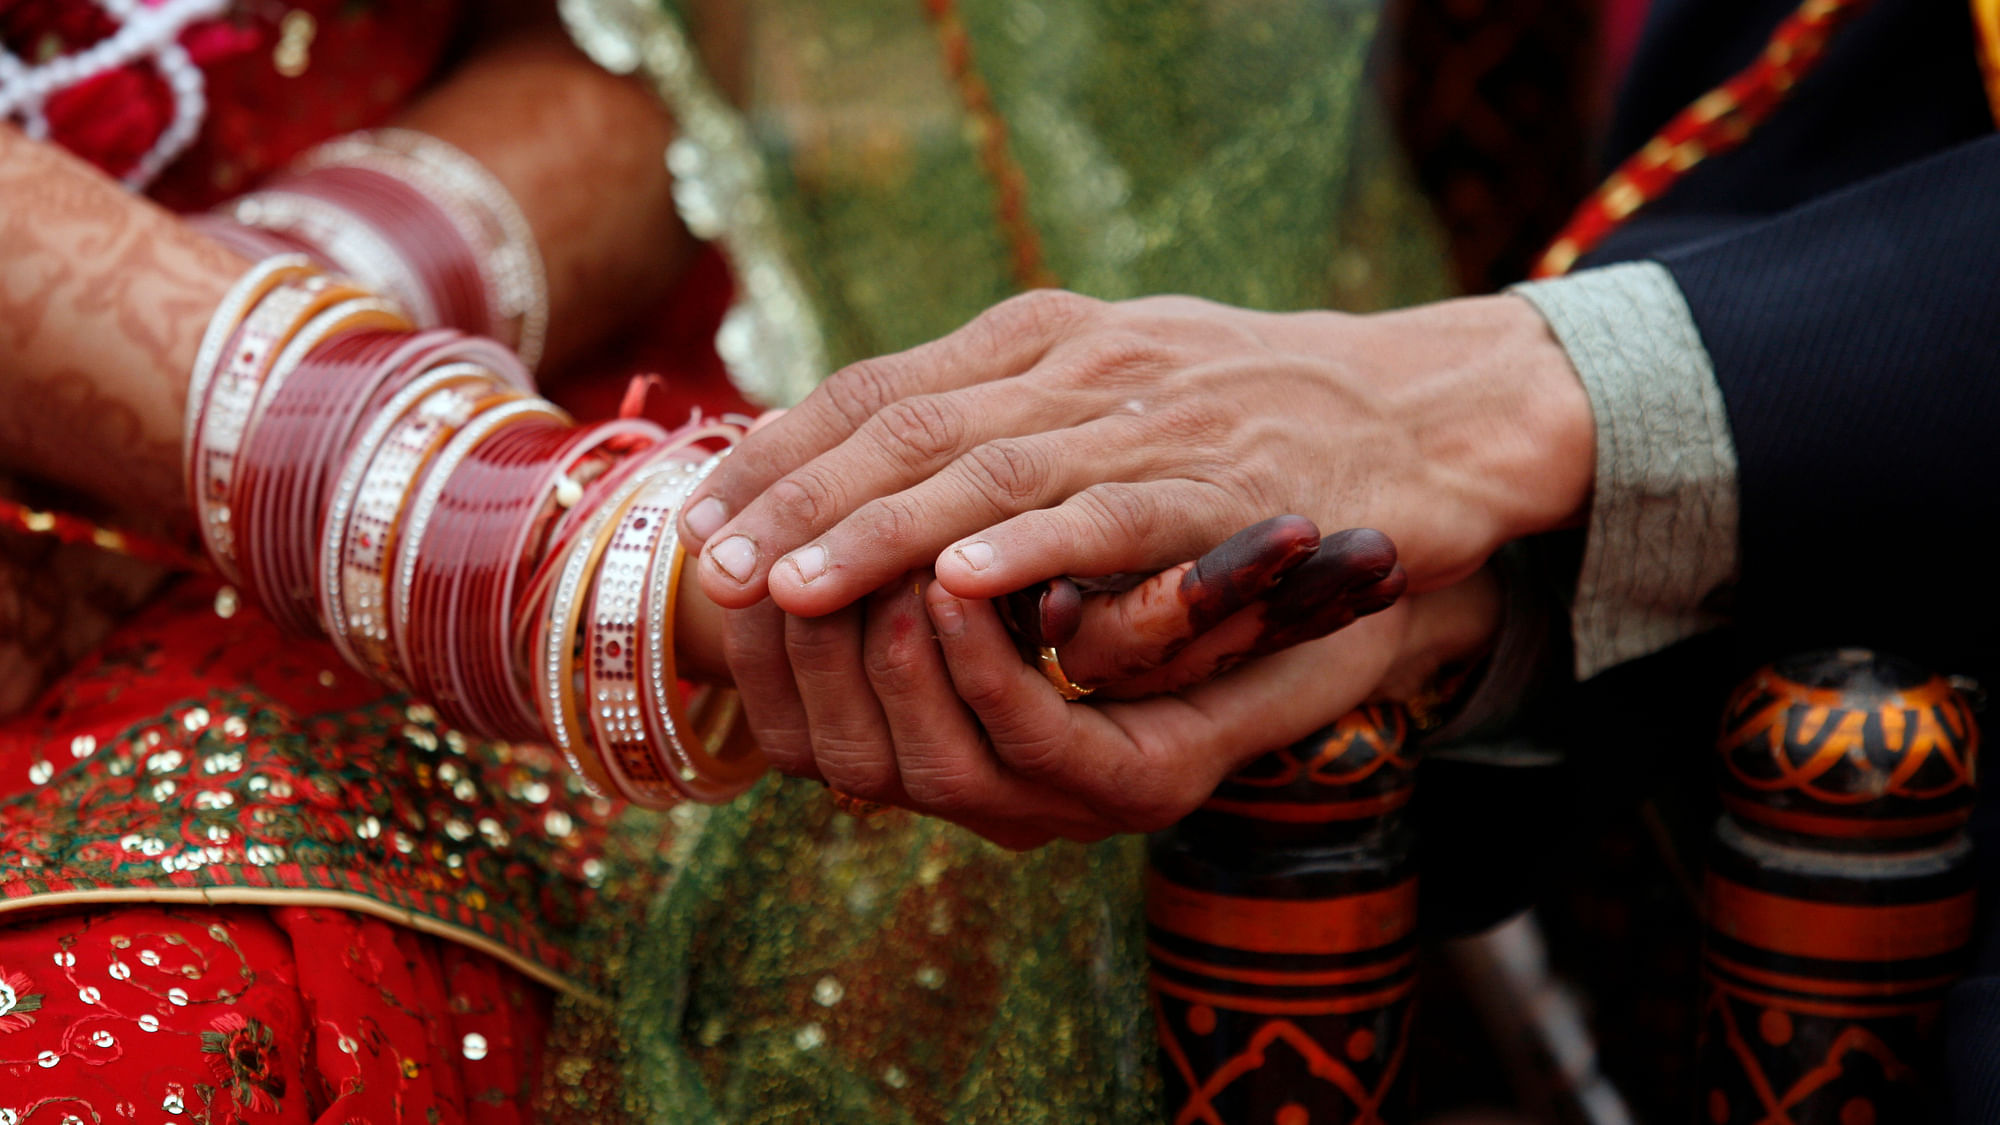 A Hindu marriage taking place. (Photo: Reuters)